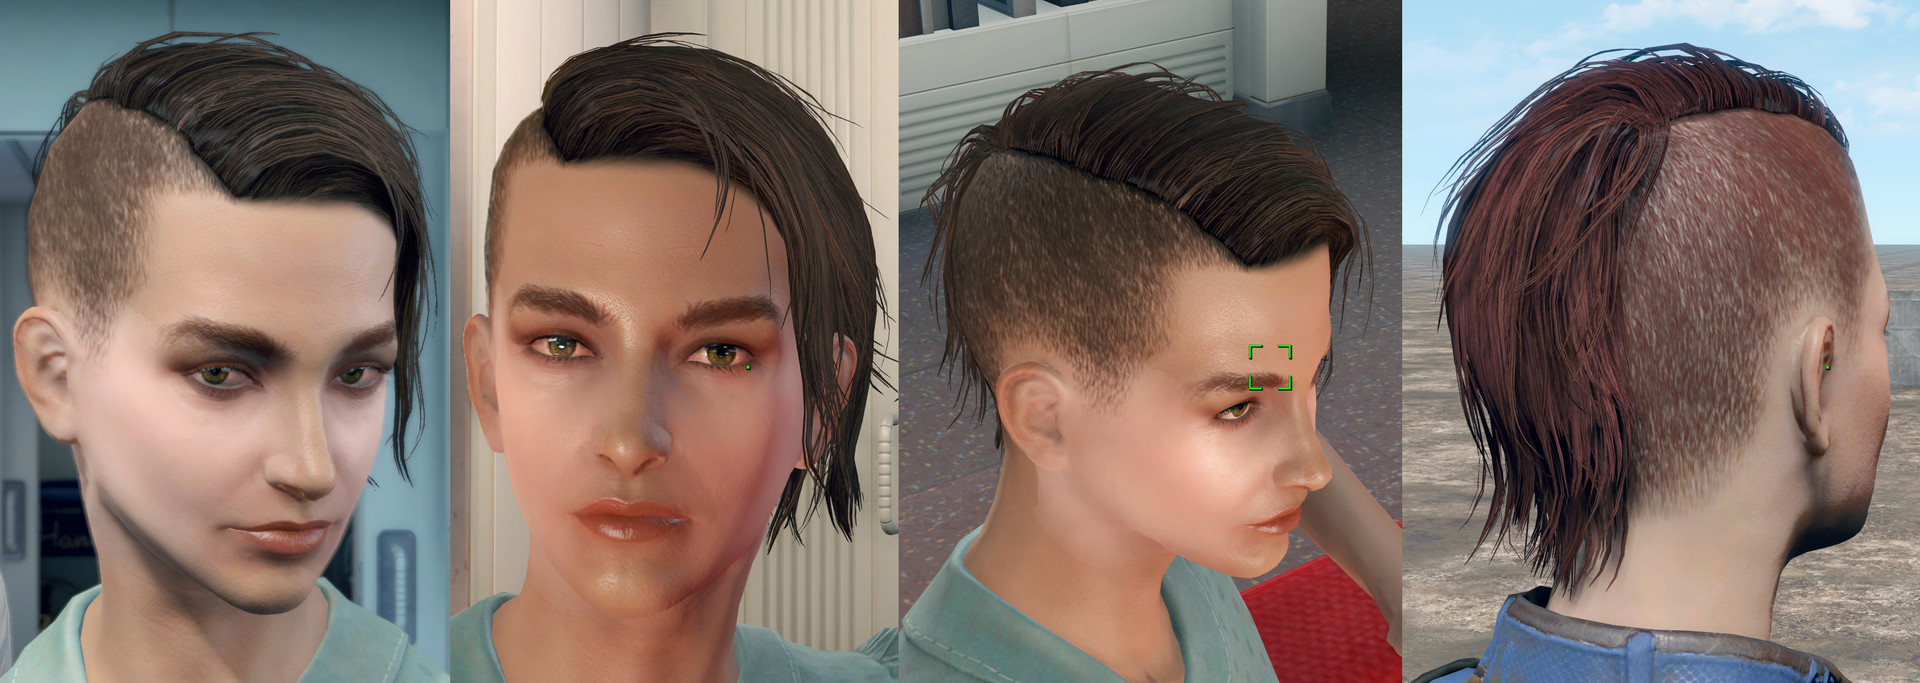 New Hair Styles at Fallout 4 Nexus - Mods and community